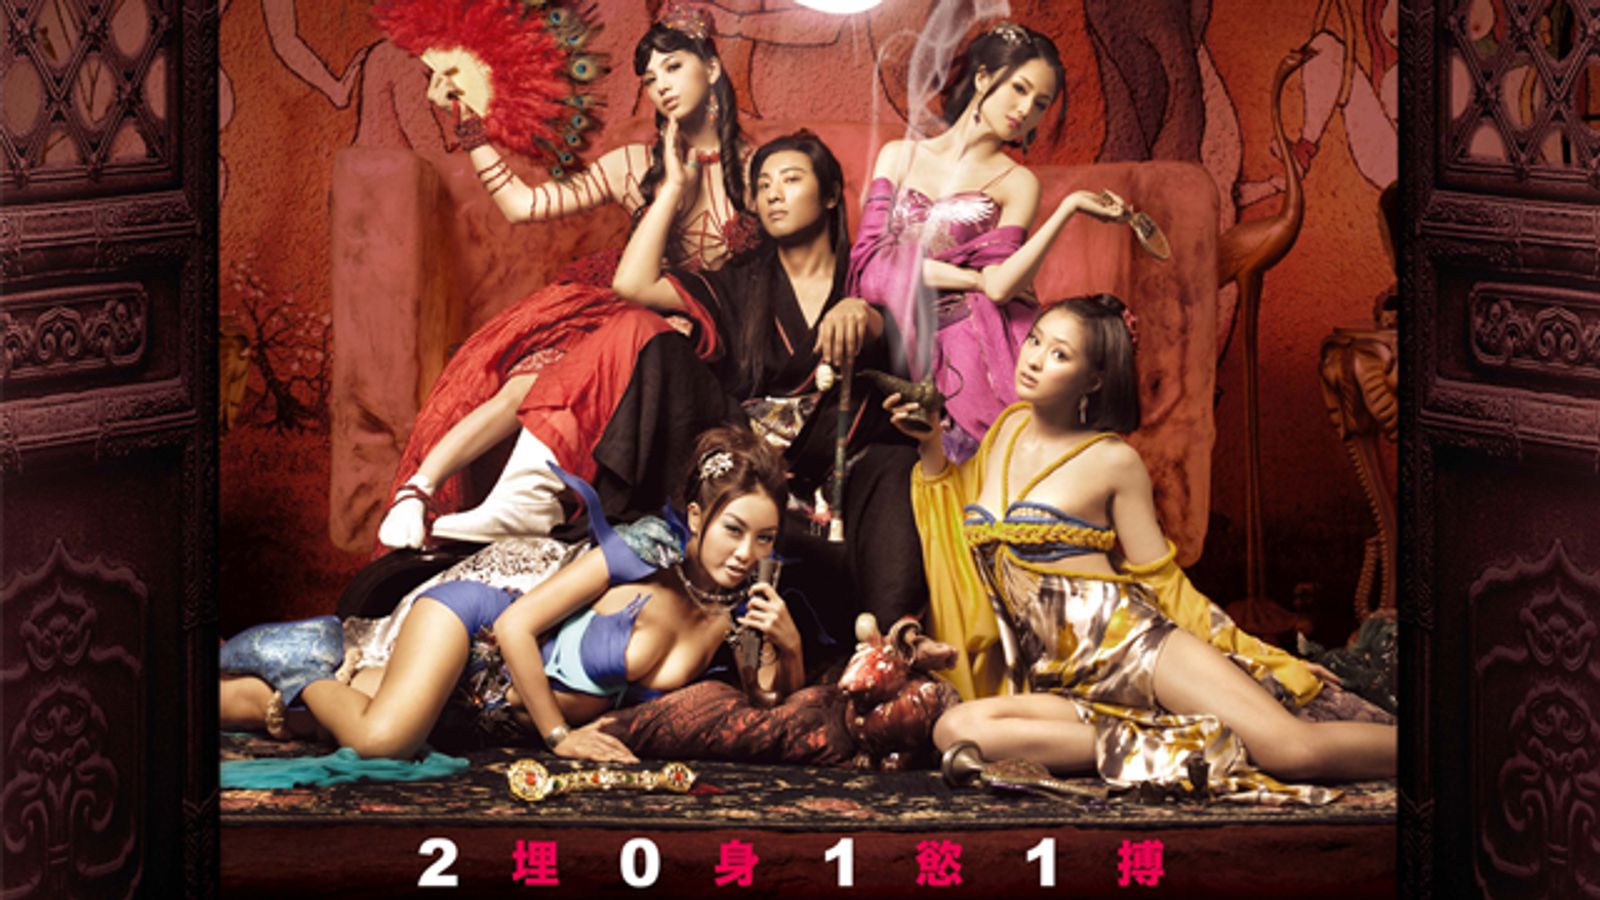 China’s 3D ‘Sex and Zen XXX’ to Screen in U.S.